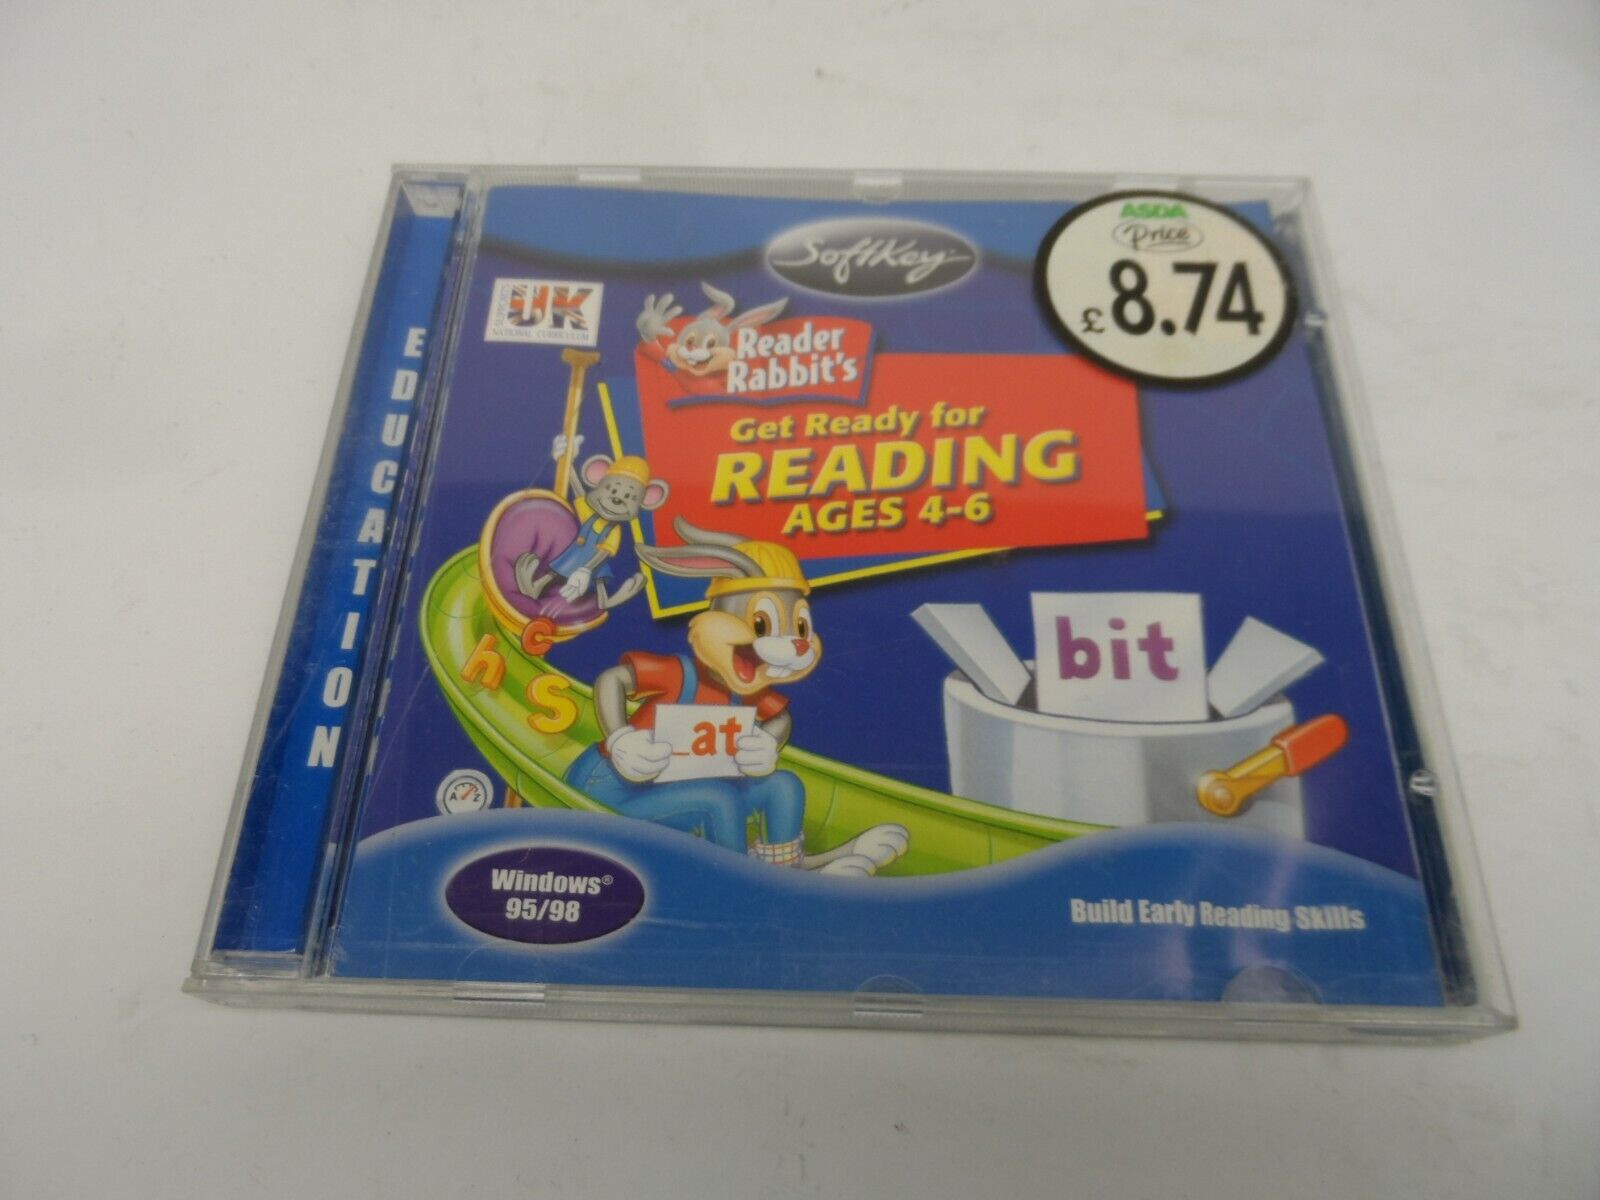 Reader Rabbit: Get Ready For Reading (Ages 4-6 Years) Windows 95/98 & Mac CD-ROM